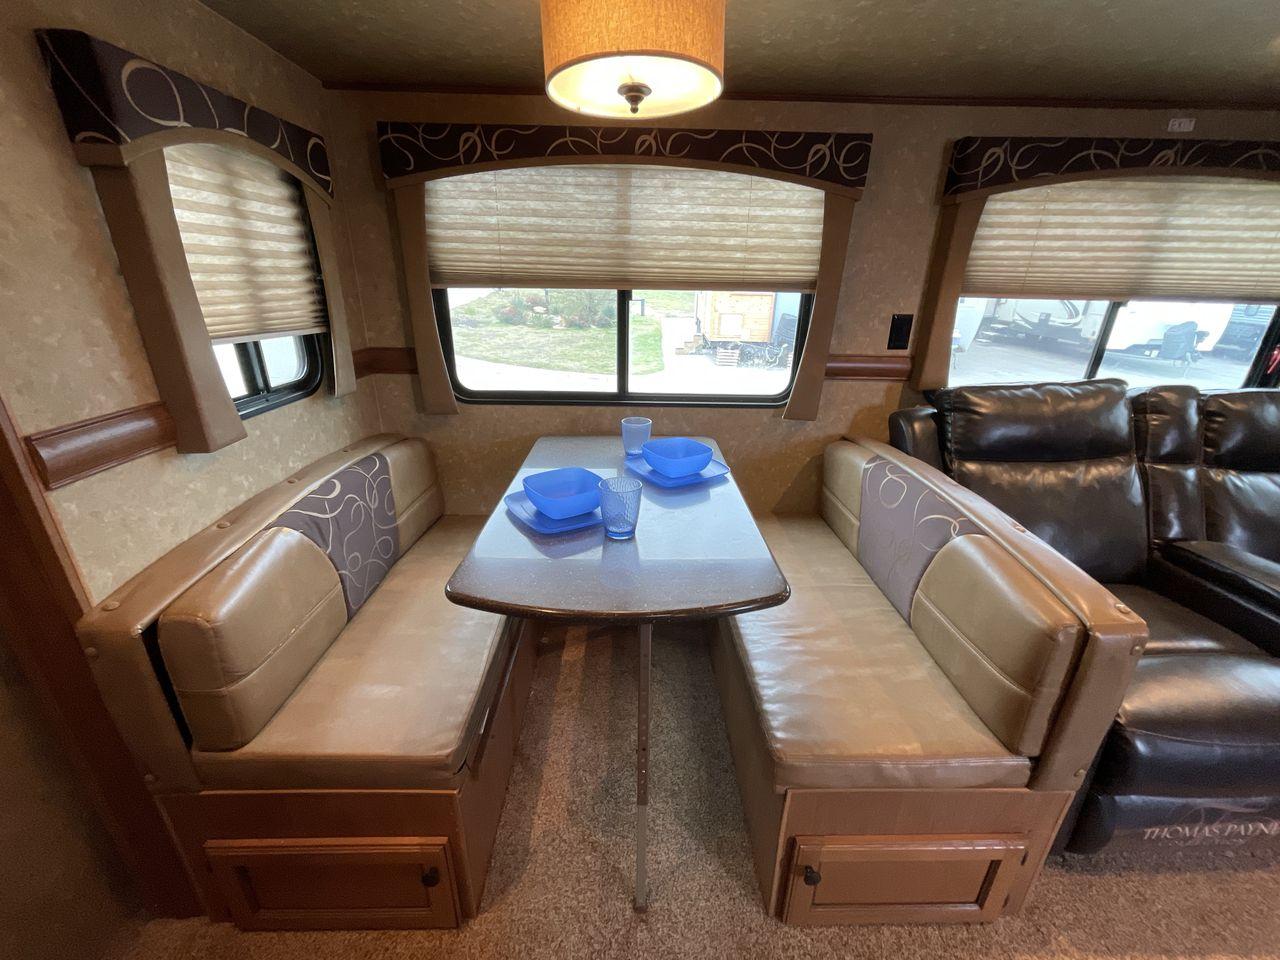 2015 CROSSROADS SUNSET TRAIL RESERVE (4V0FC2624FB) , Length: 30.17 ft | Dry Weight: 6,401 lbs | Gross Weight: 9,542 lbs | Slides: 2 transmission, located at 4319 N Main St, Cleburne, TX, 76033, (817) 678-5133, 32.385960, -97.391212 - This model has the right mix of space and maneuverability, with a length of 30 feet and a dry weight of 6,401 pounds. With a strong aluminum frame and fiberglass sidewalls, it will last for a long time on the road, making it a great choice for travelers who want both style and dependability. The Sun - Photo #14